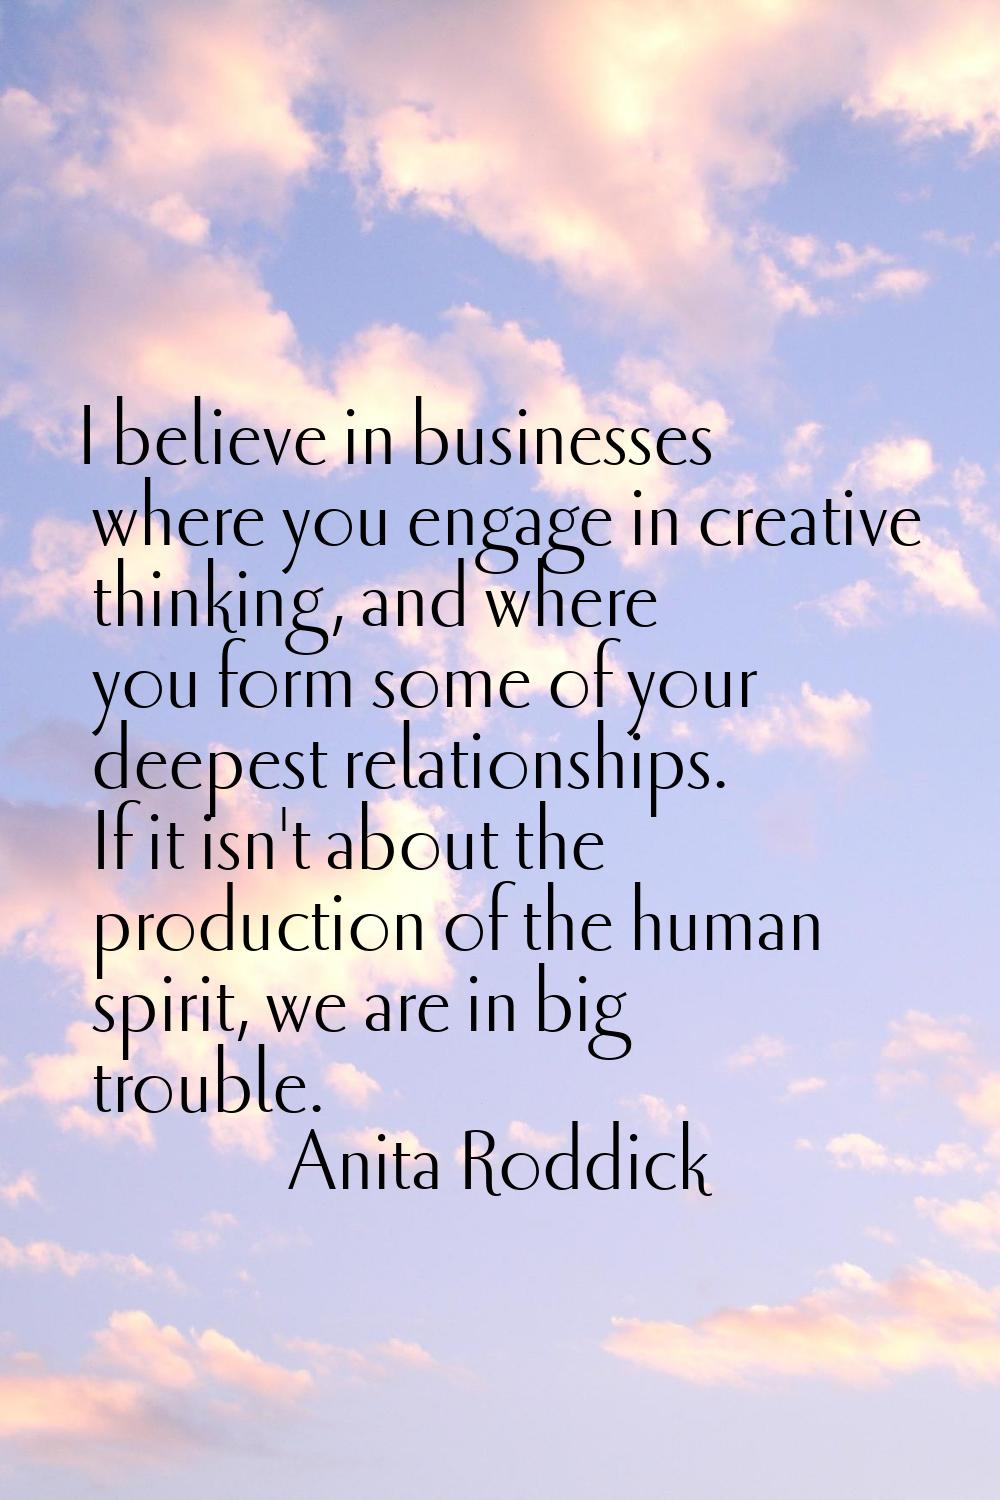 I believe in businesses where you engage in creative thinking, and where you form some of your deep